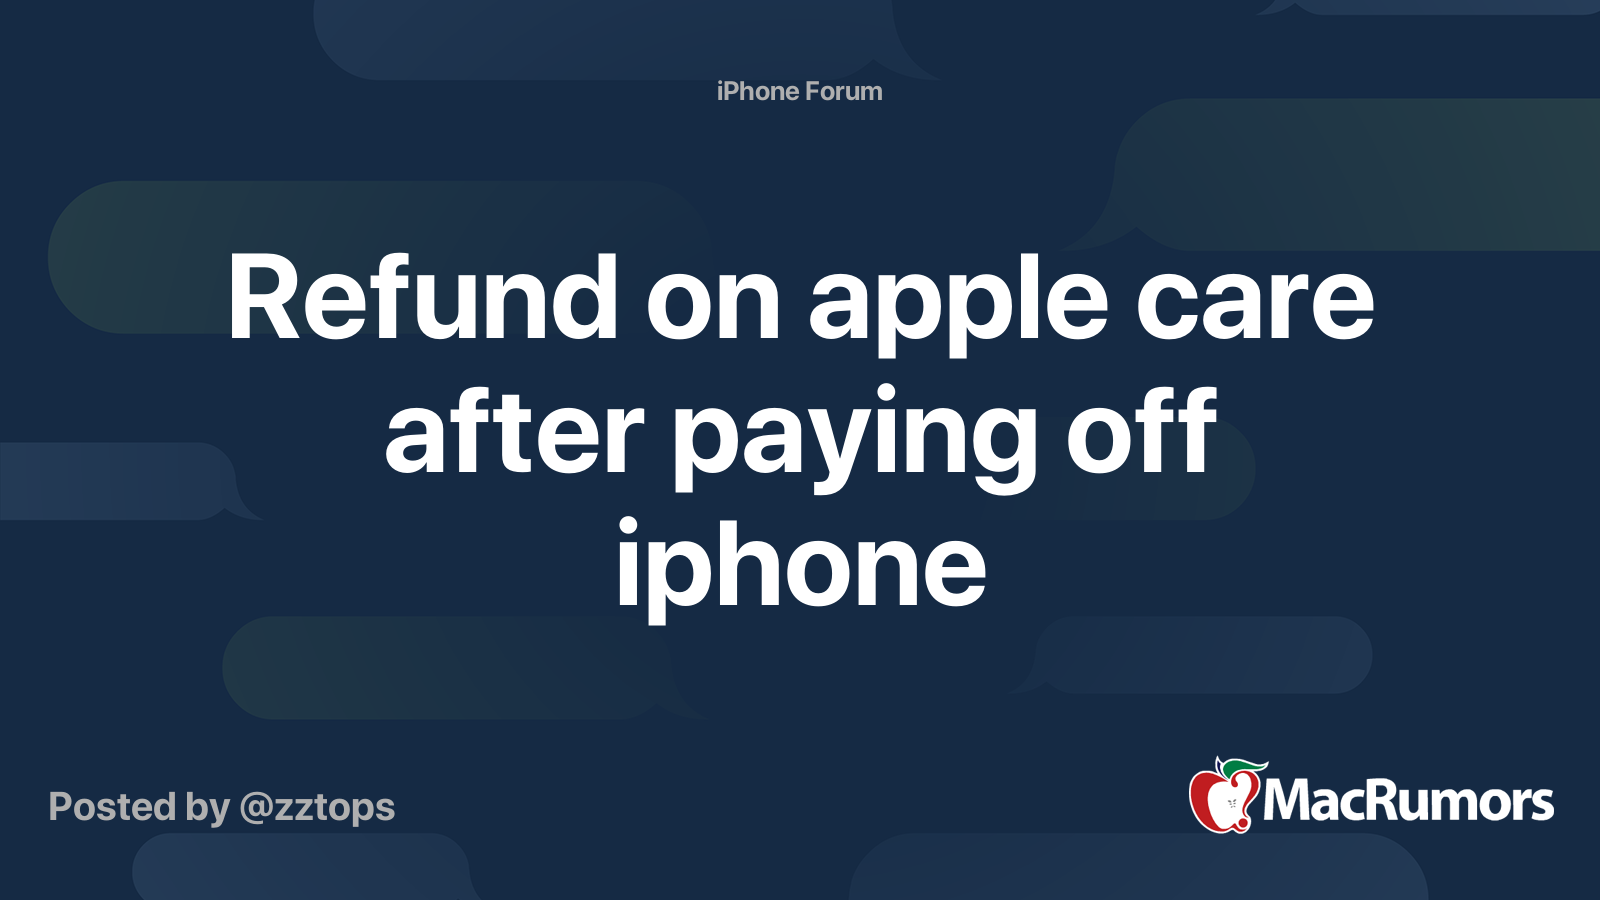 refund-on-apple-care-after-paying-off-iphone-macrumors-forums